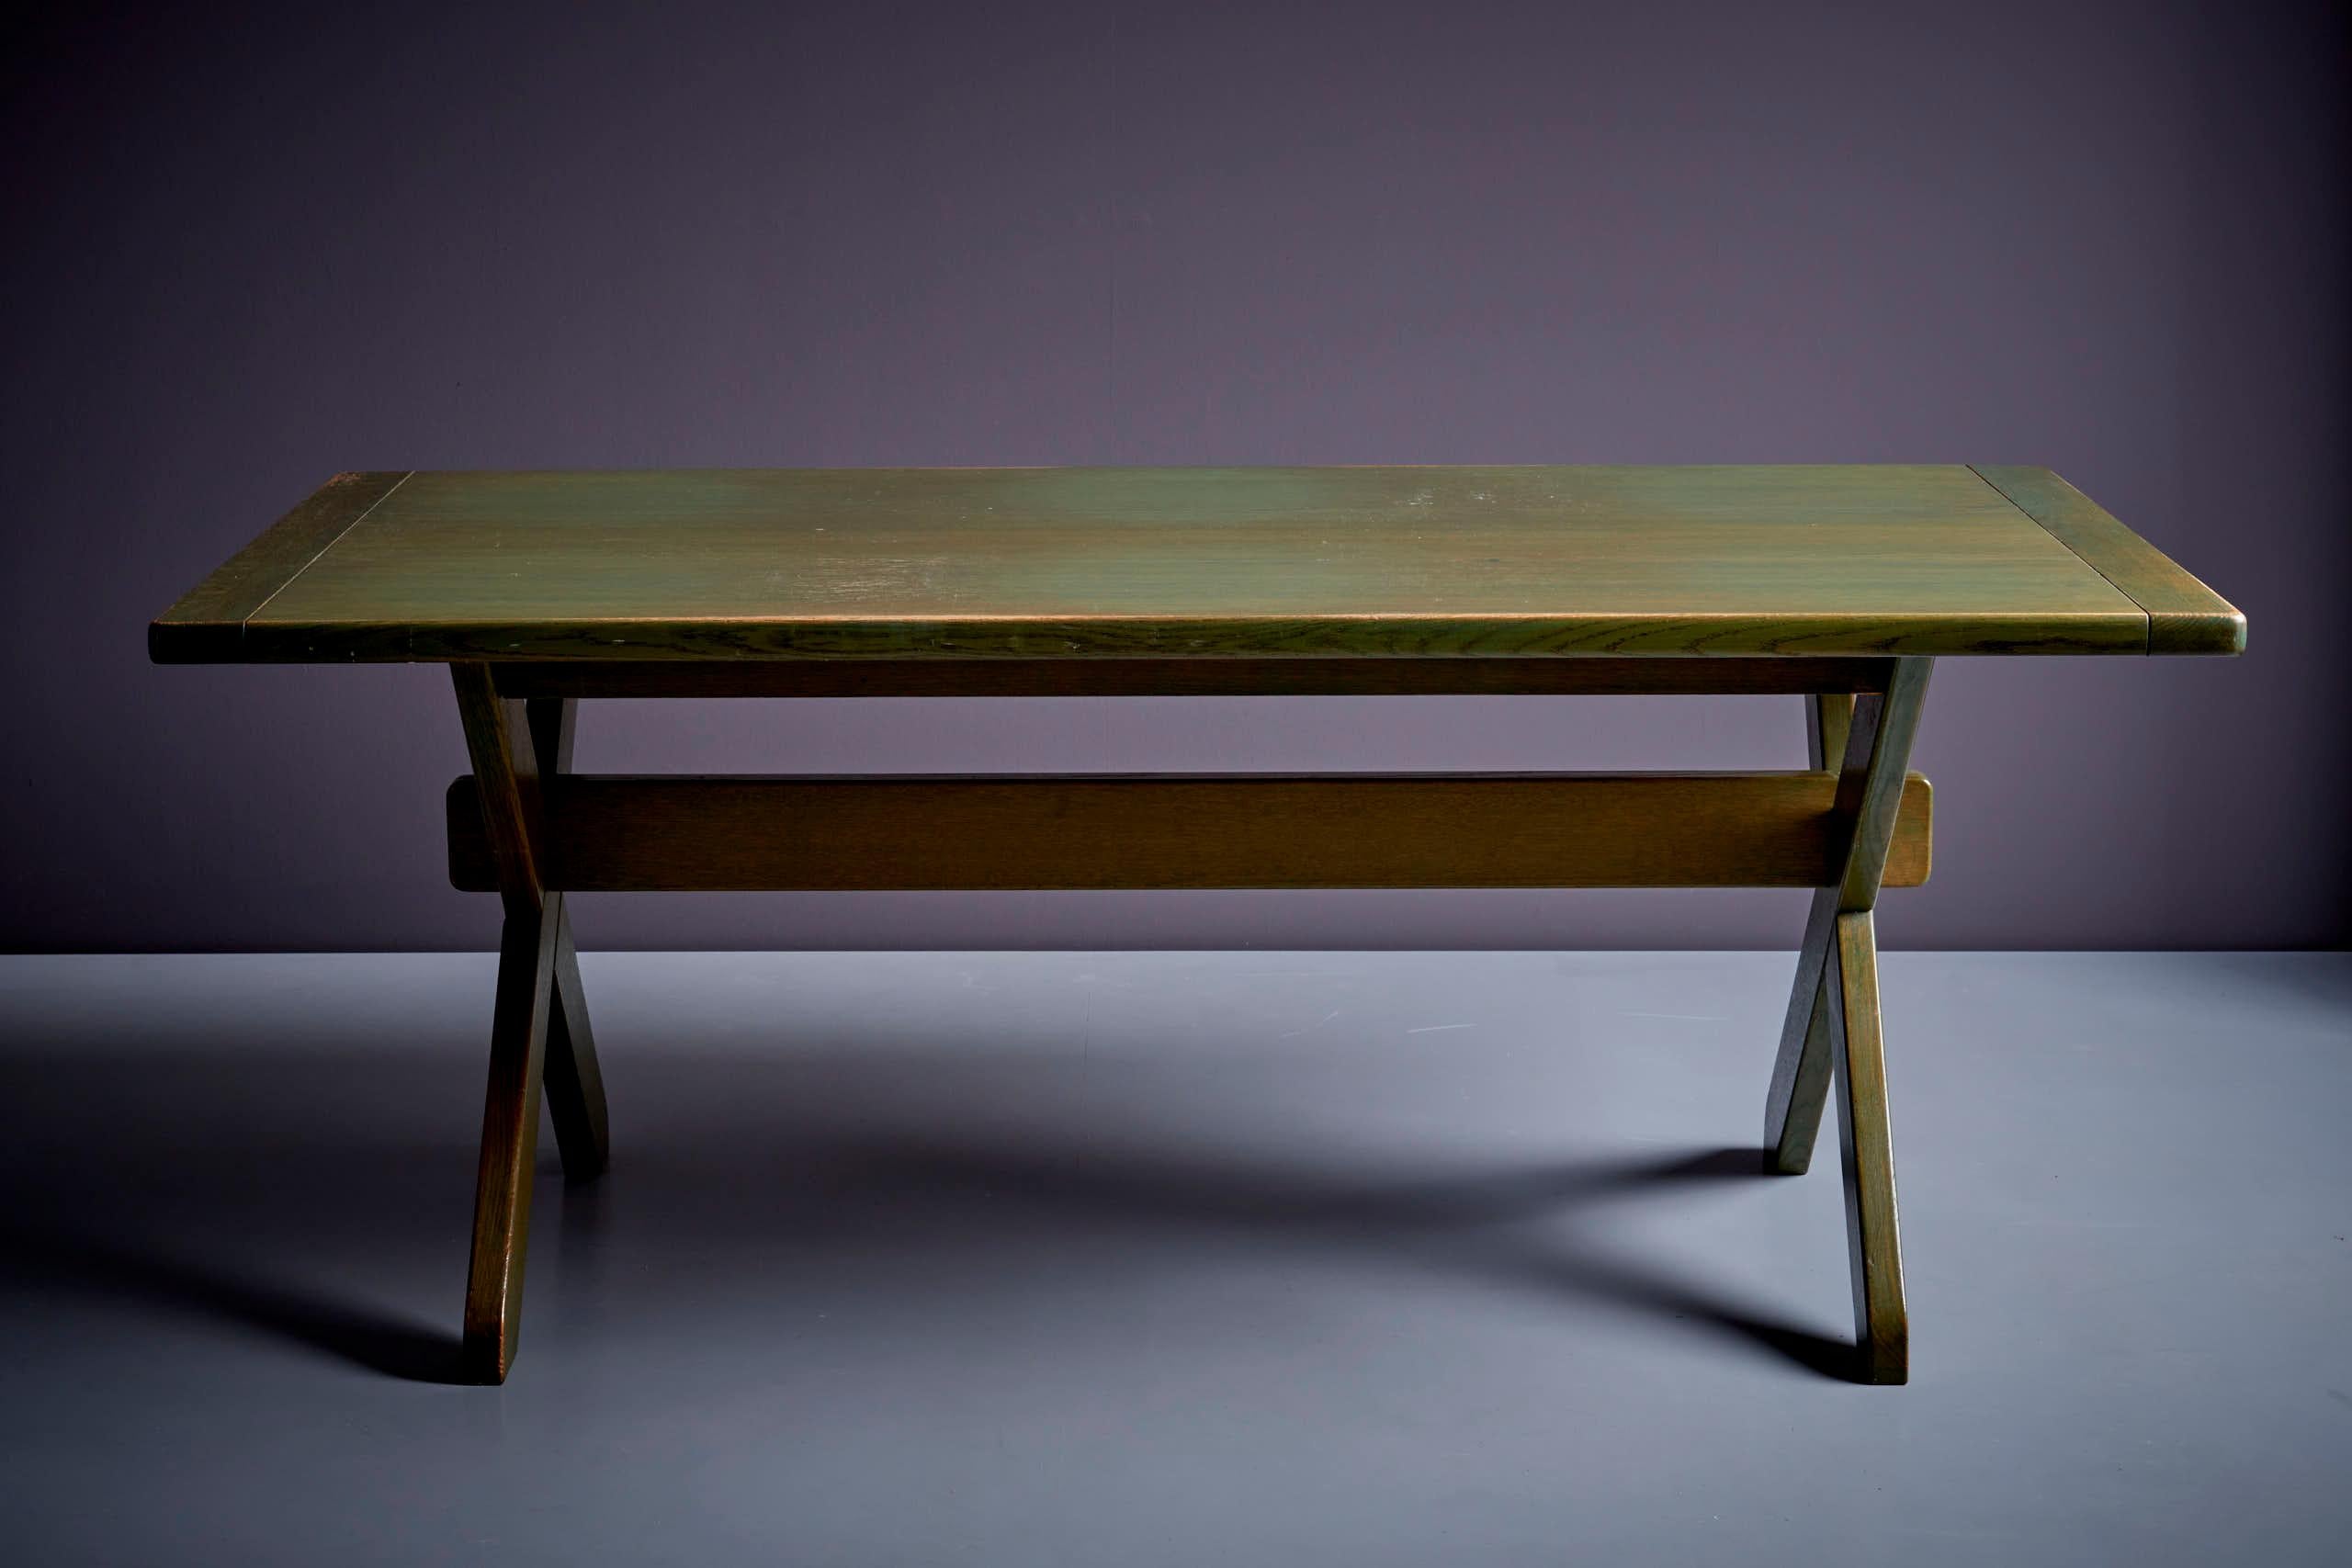 WK Möbel Dining Table in Green Pine Wood, Germany - 1960s For Sale 2